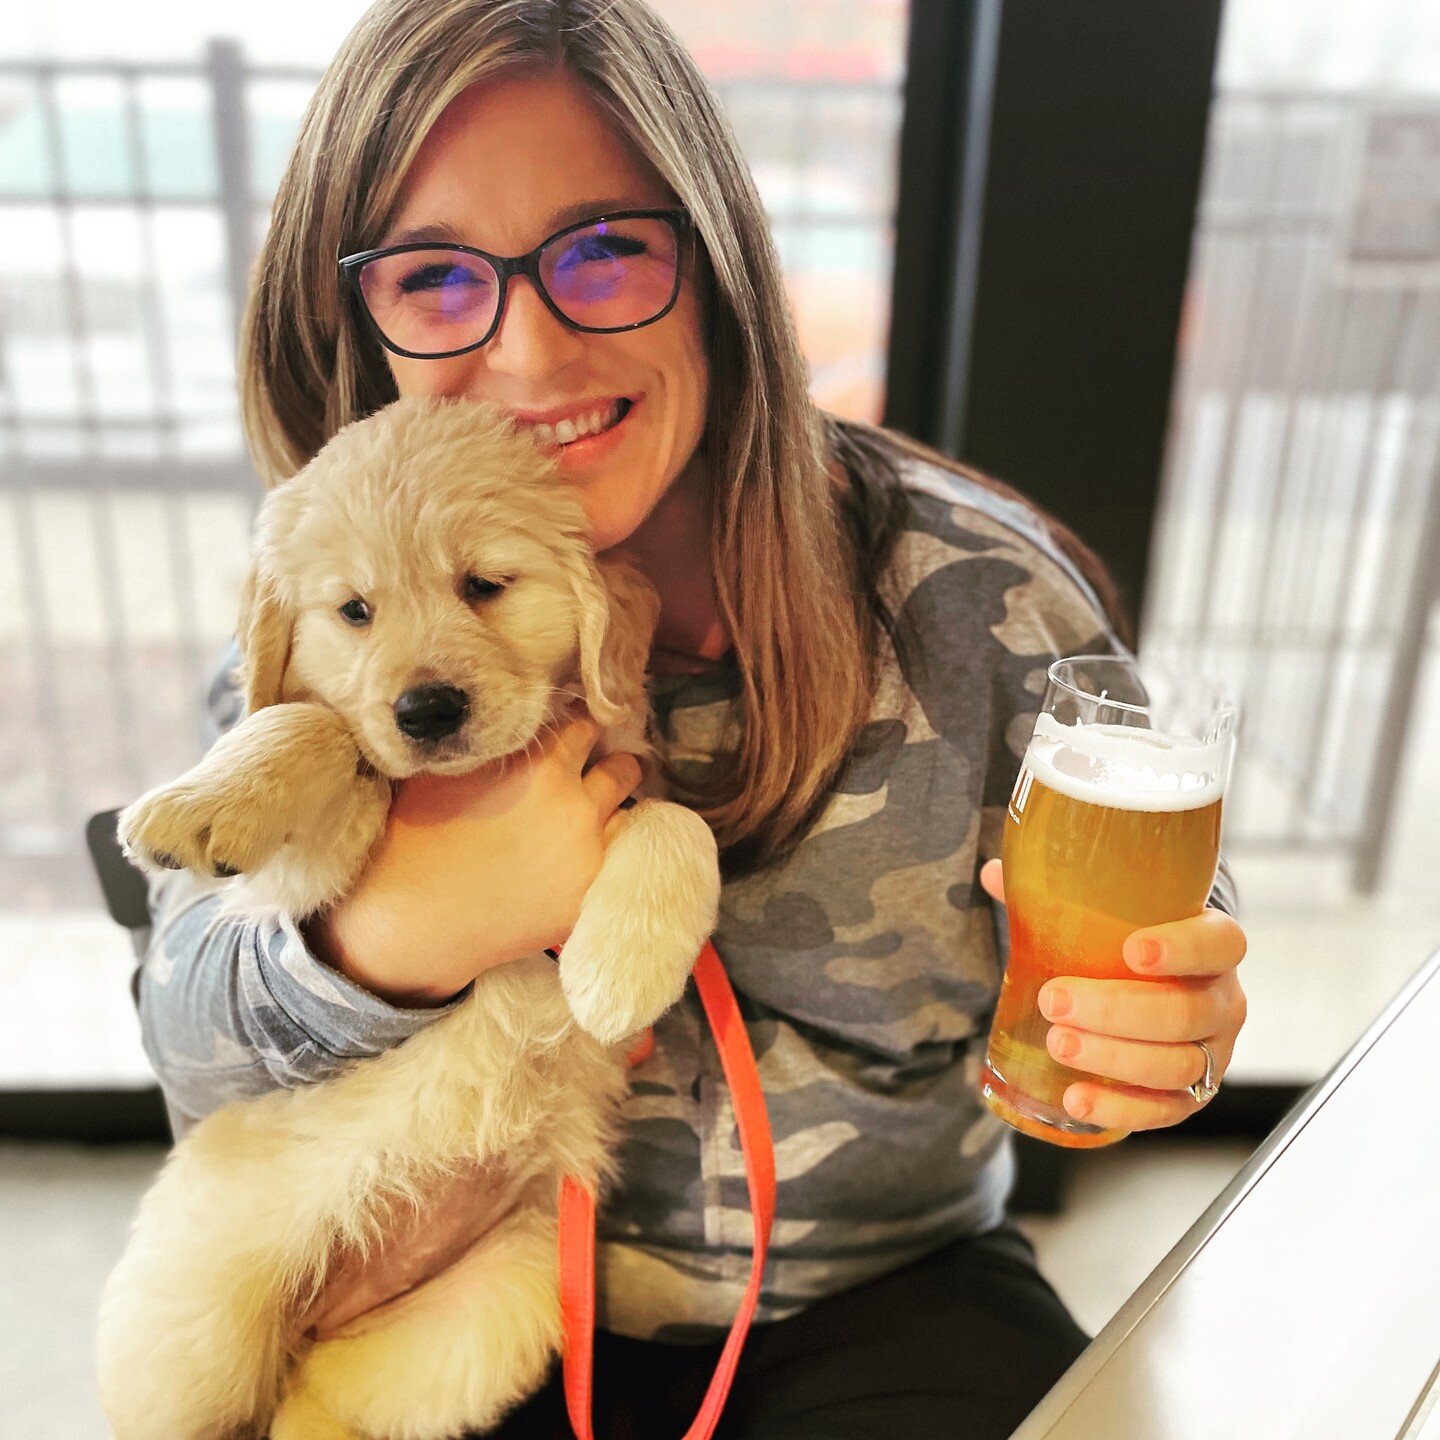 🐶Meet Nora. I guess you can say, she is Uptown Doula's official mascot. A little bit about our sweet puppy...

1. Breed: Golden Retriever
2. Parents: Nala &amp; General Patton
3. Craft beer lover (duh)
4. Loves long walks on the beach and the taste 